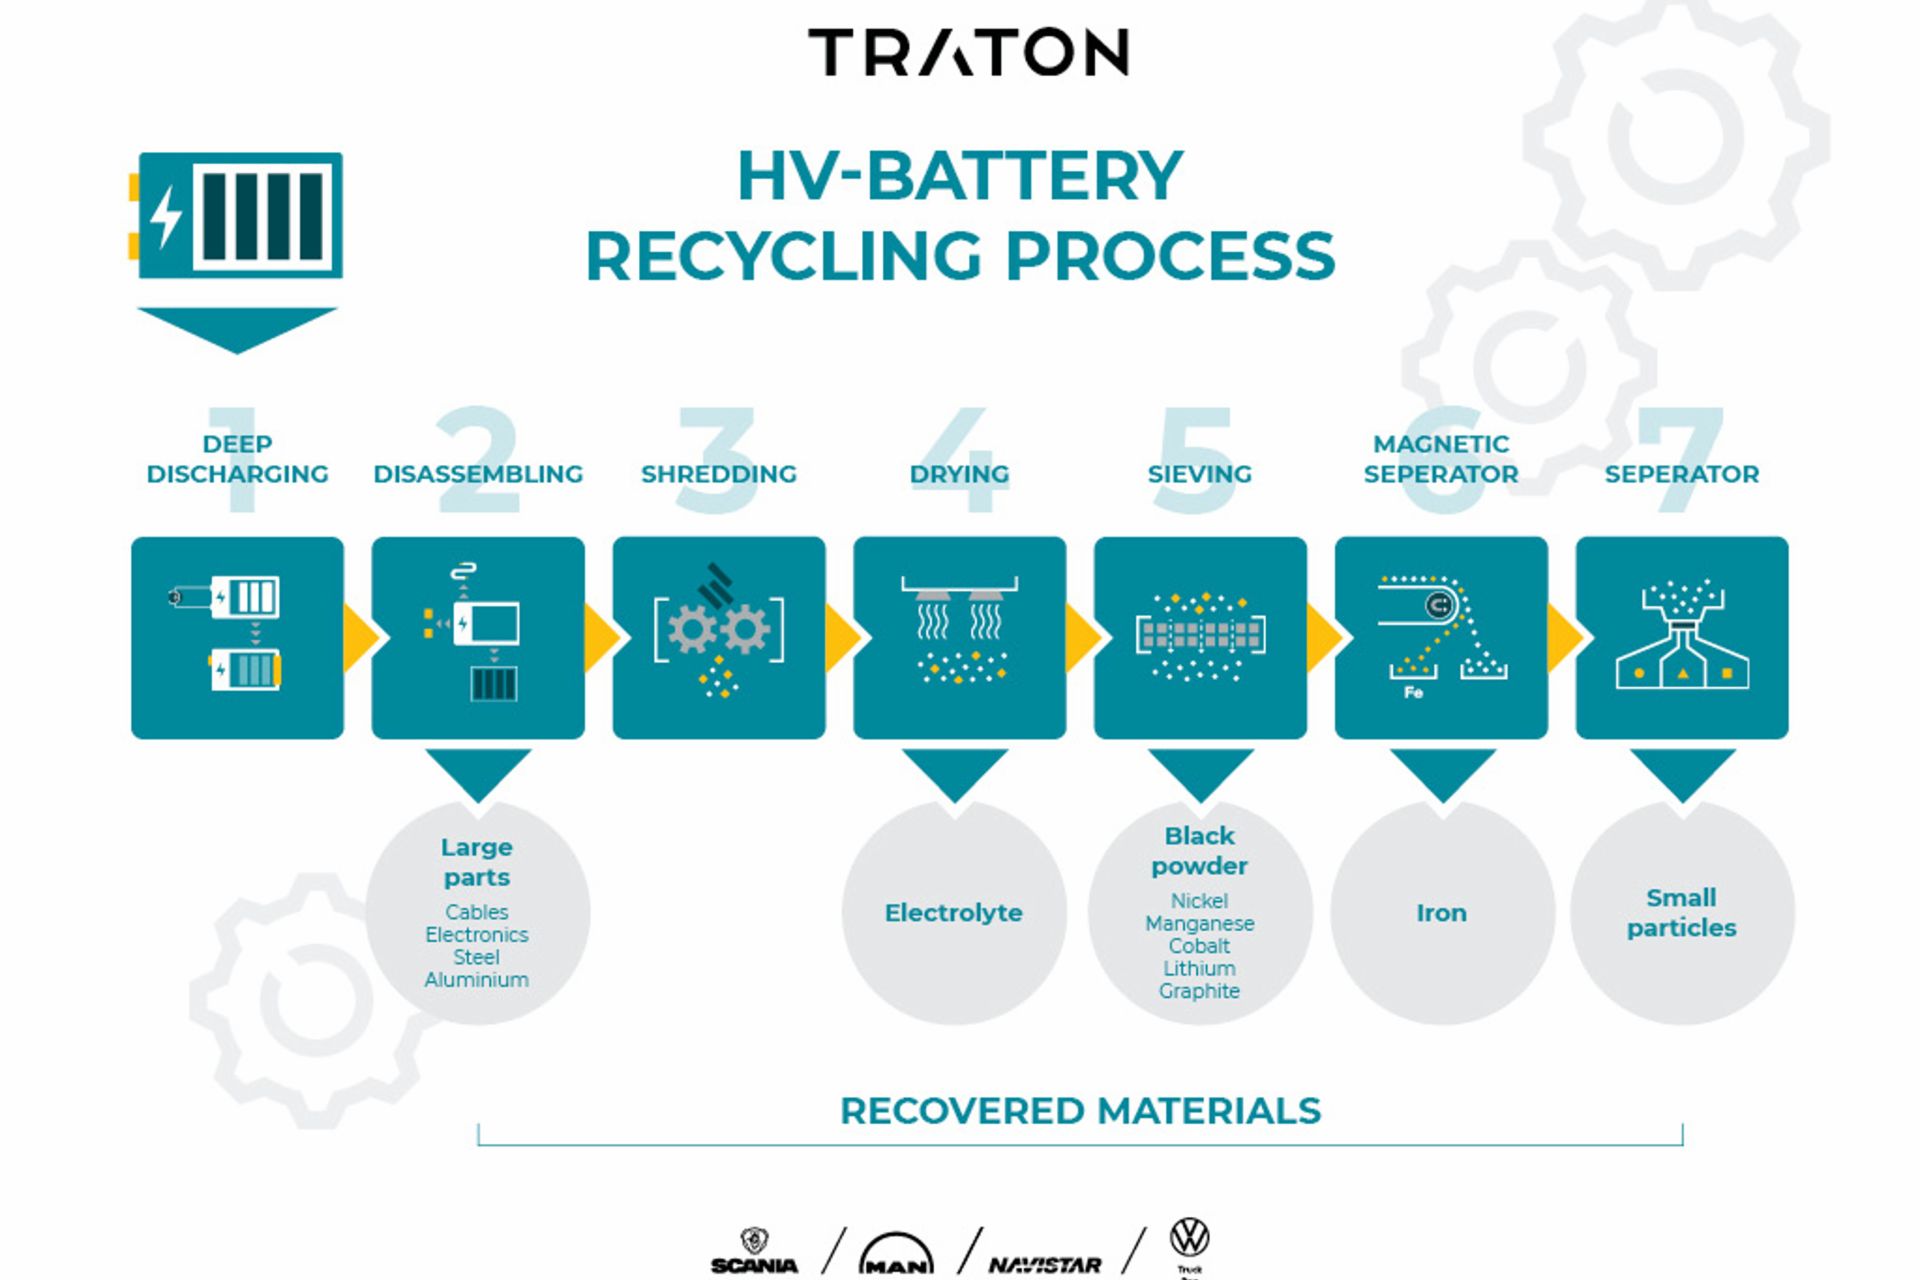 How the recycling process of commercial vehicle batteries works
